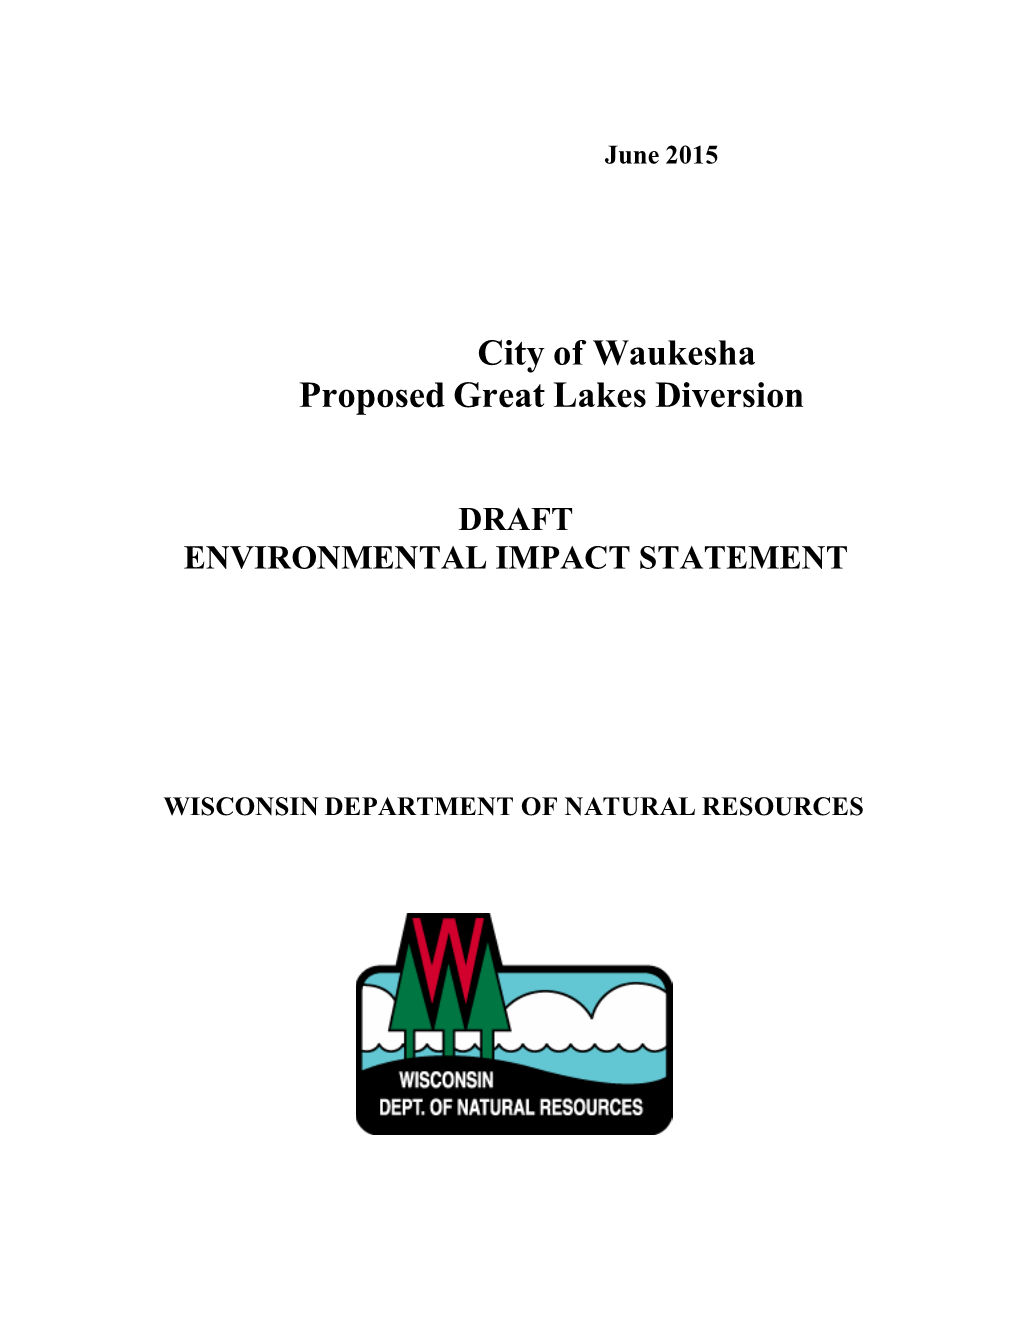 City of Waukesha Proposed Great Lakes Diversion